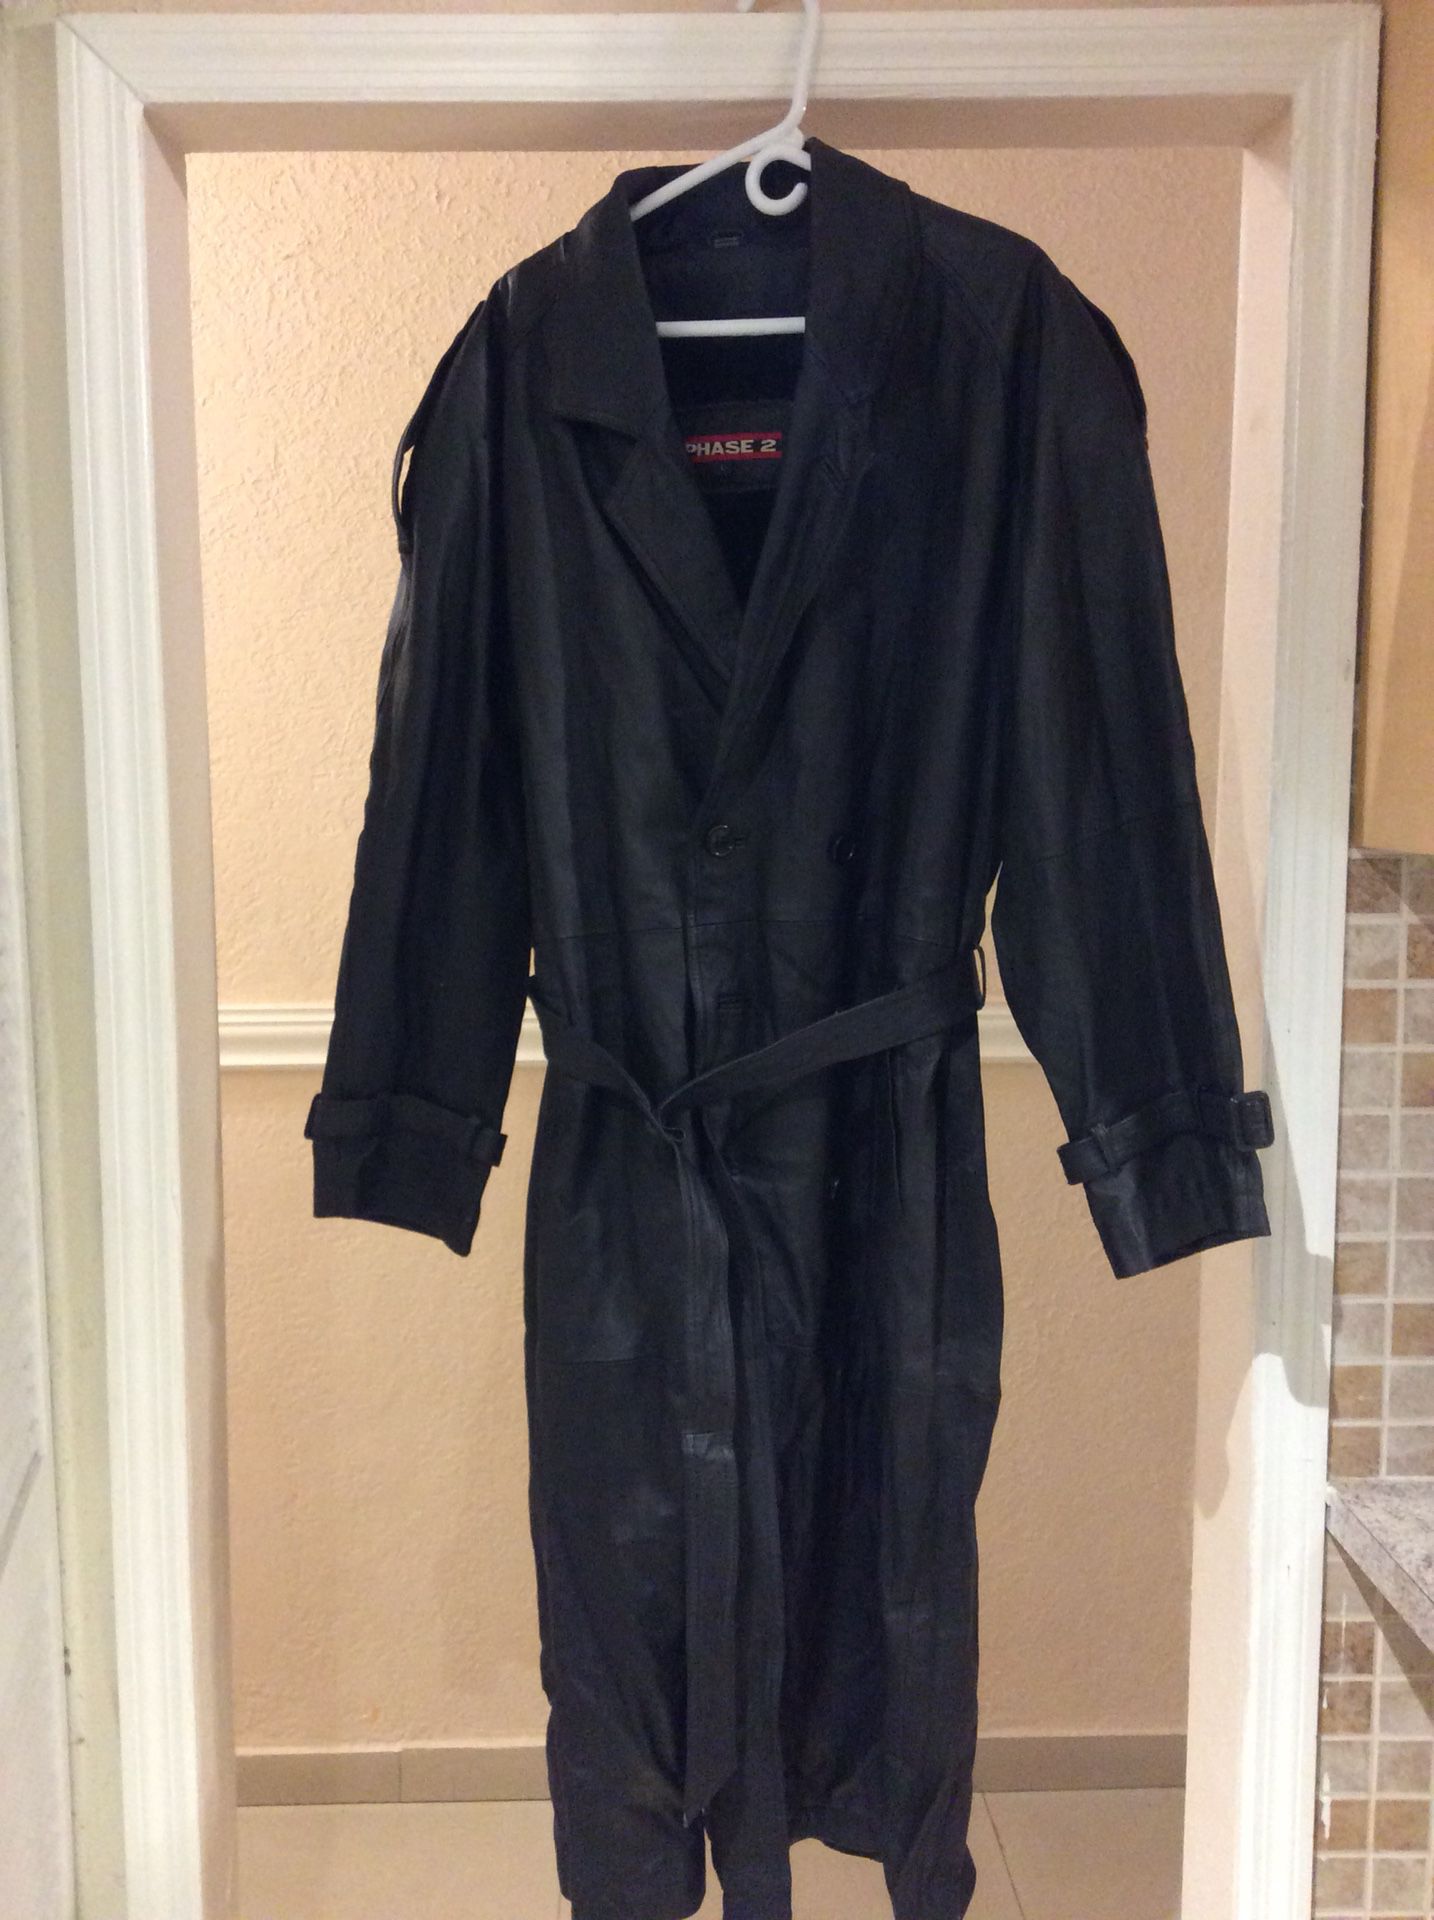 Men’s full length genuine leather trench coat with body lining. Large